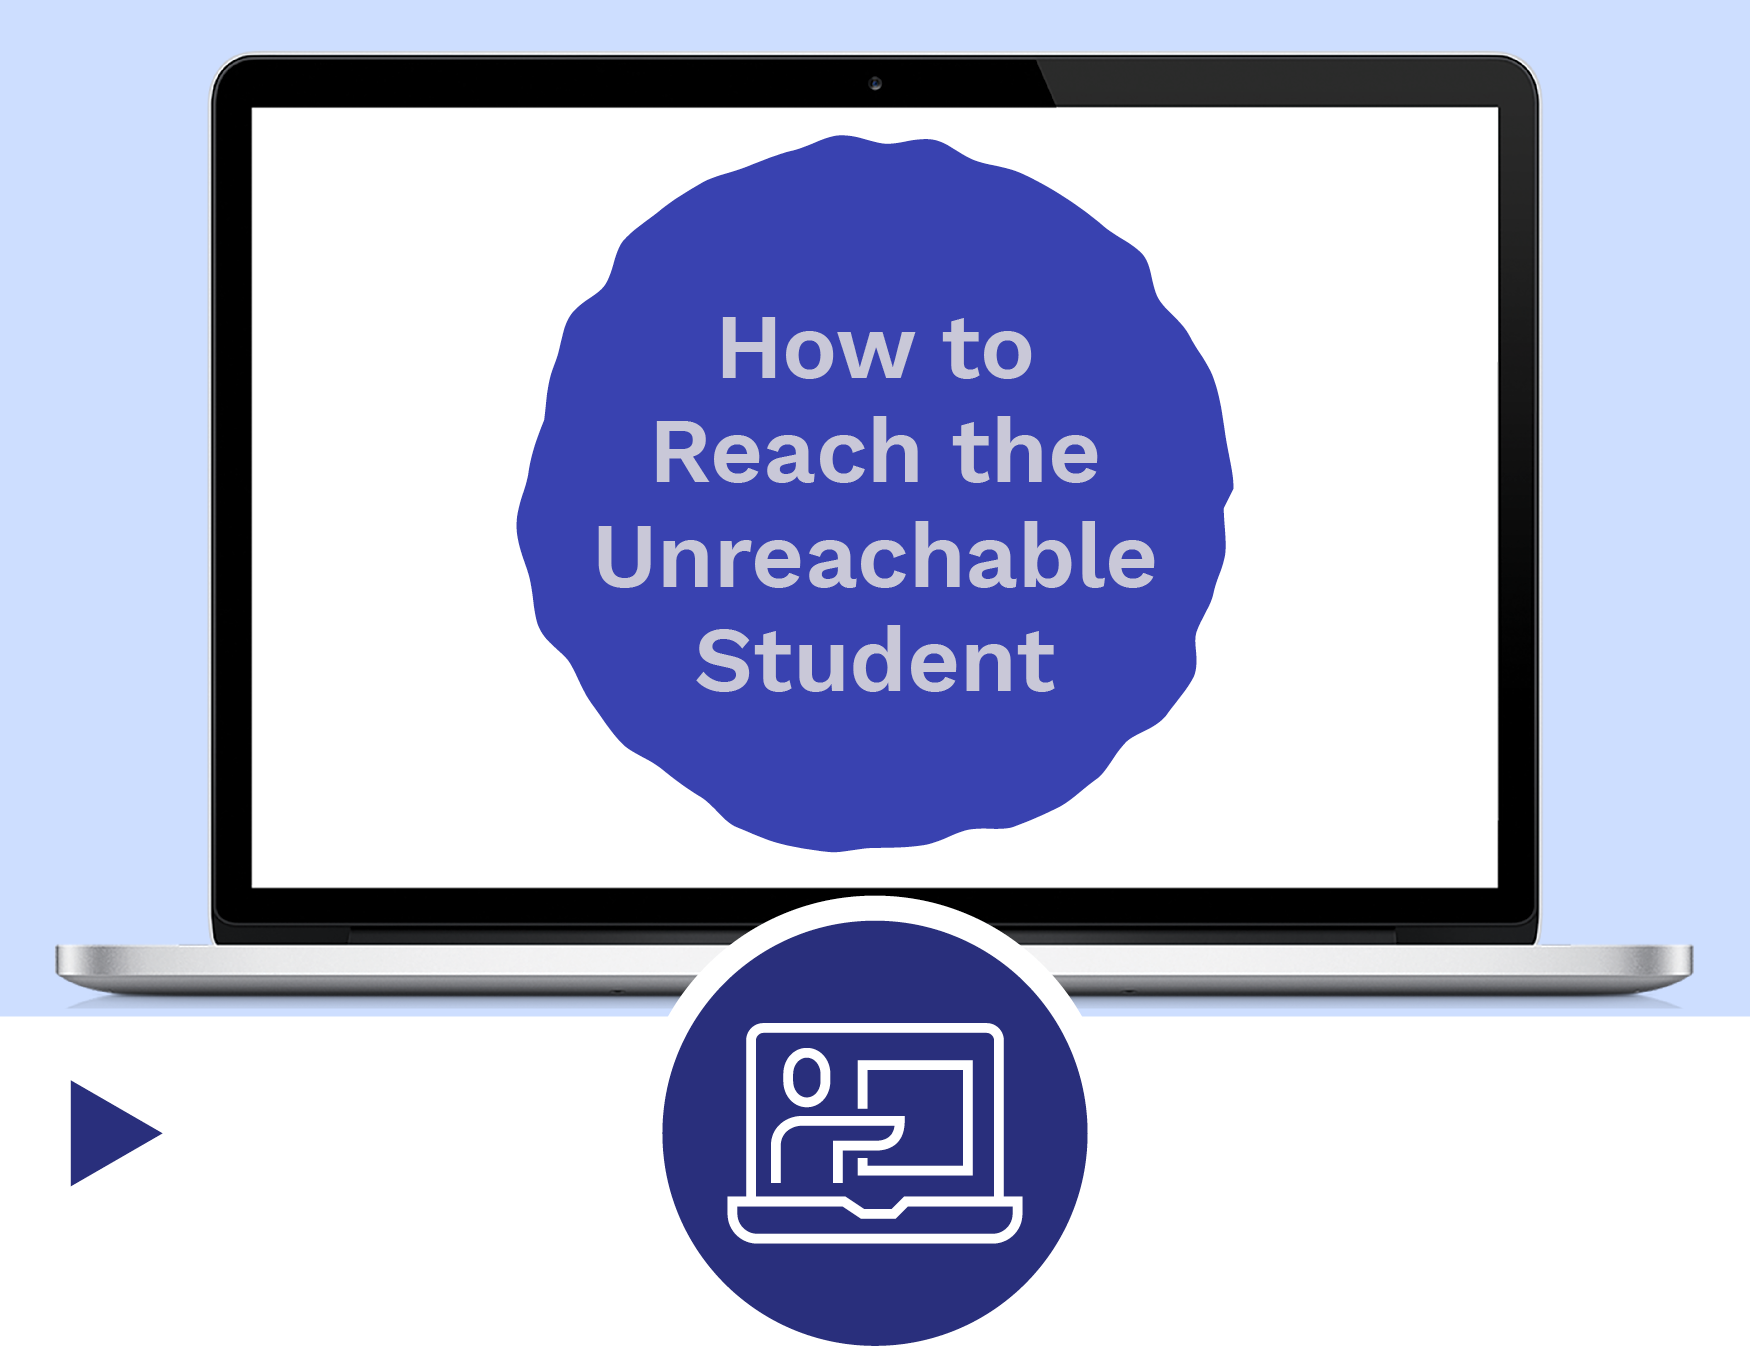 How to Reach the Unreachable Student